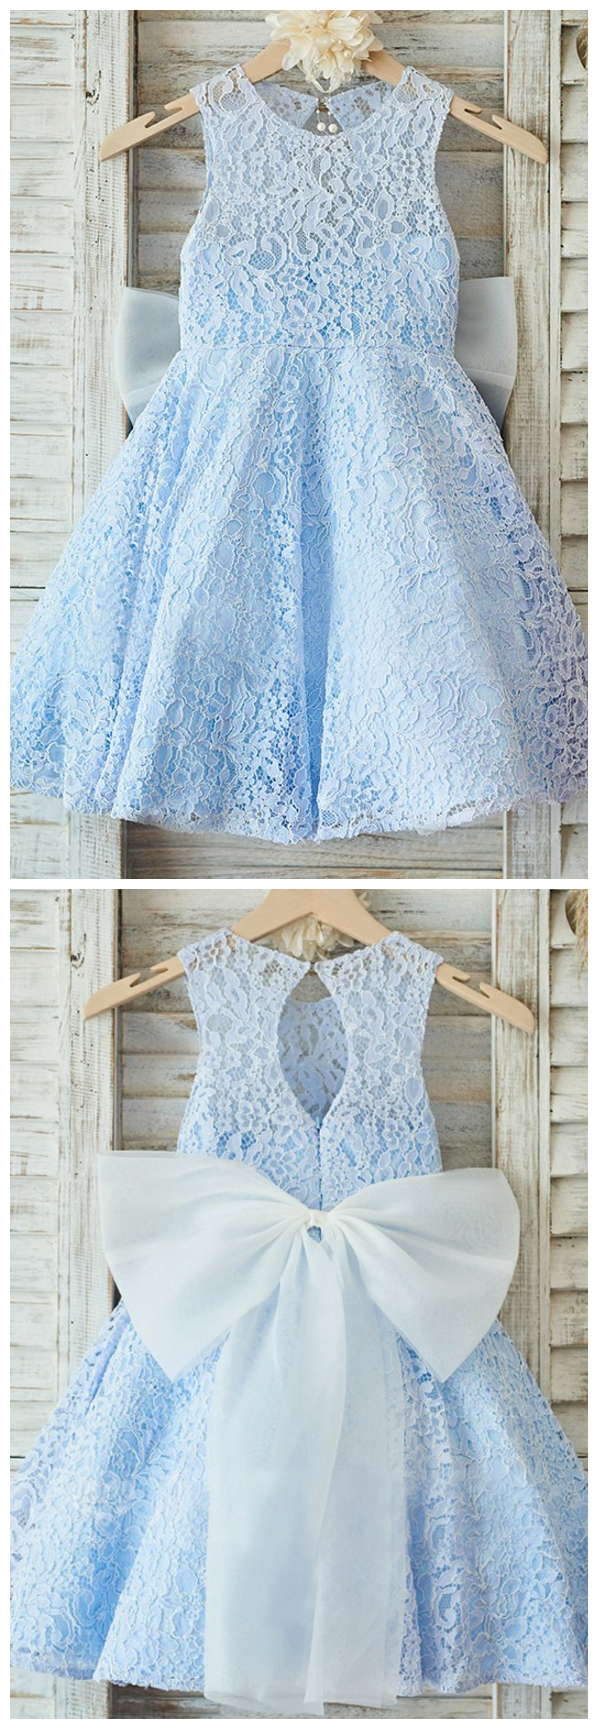 Adorable Blue Flower Girl Dresses Lace Appliques Toddler Infant Tea Length Kids Birthday Christmas Dress Girls Wedding Party Gowns